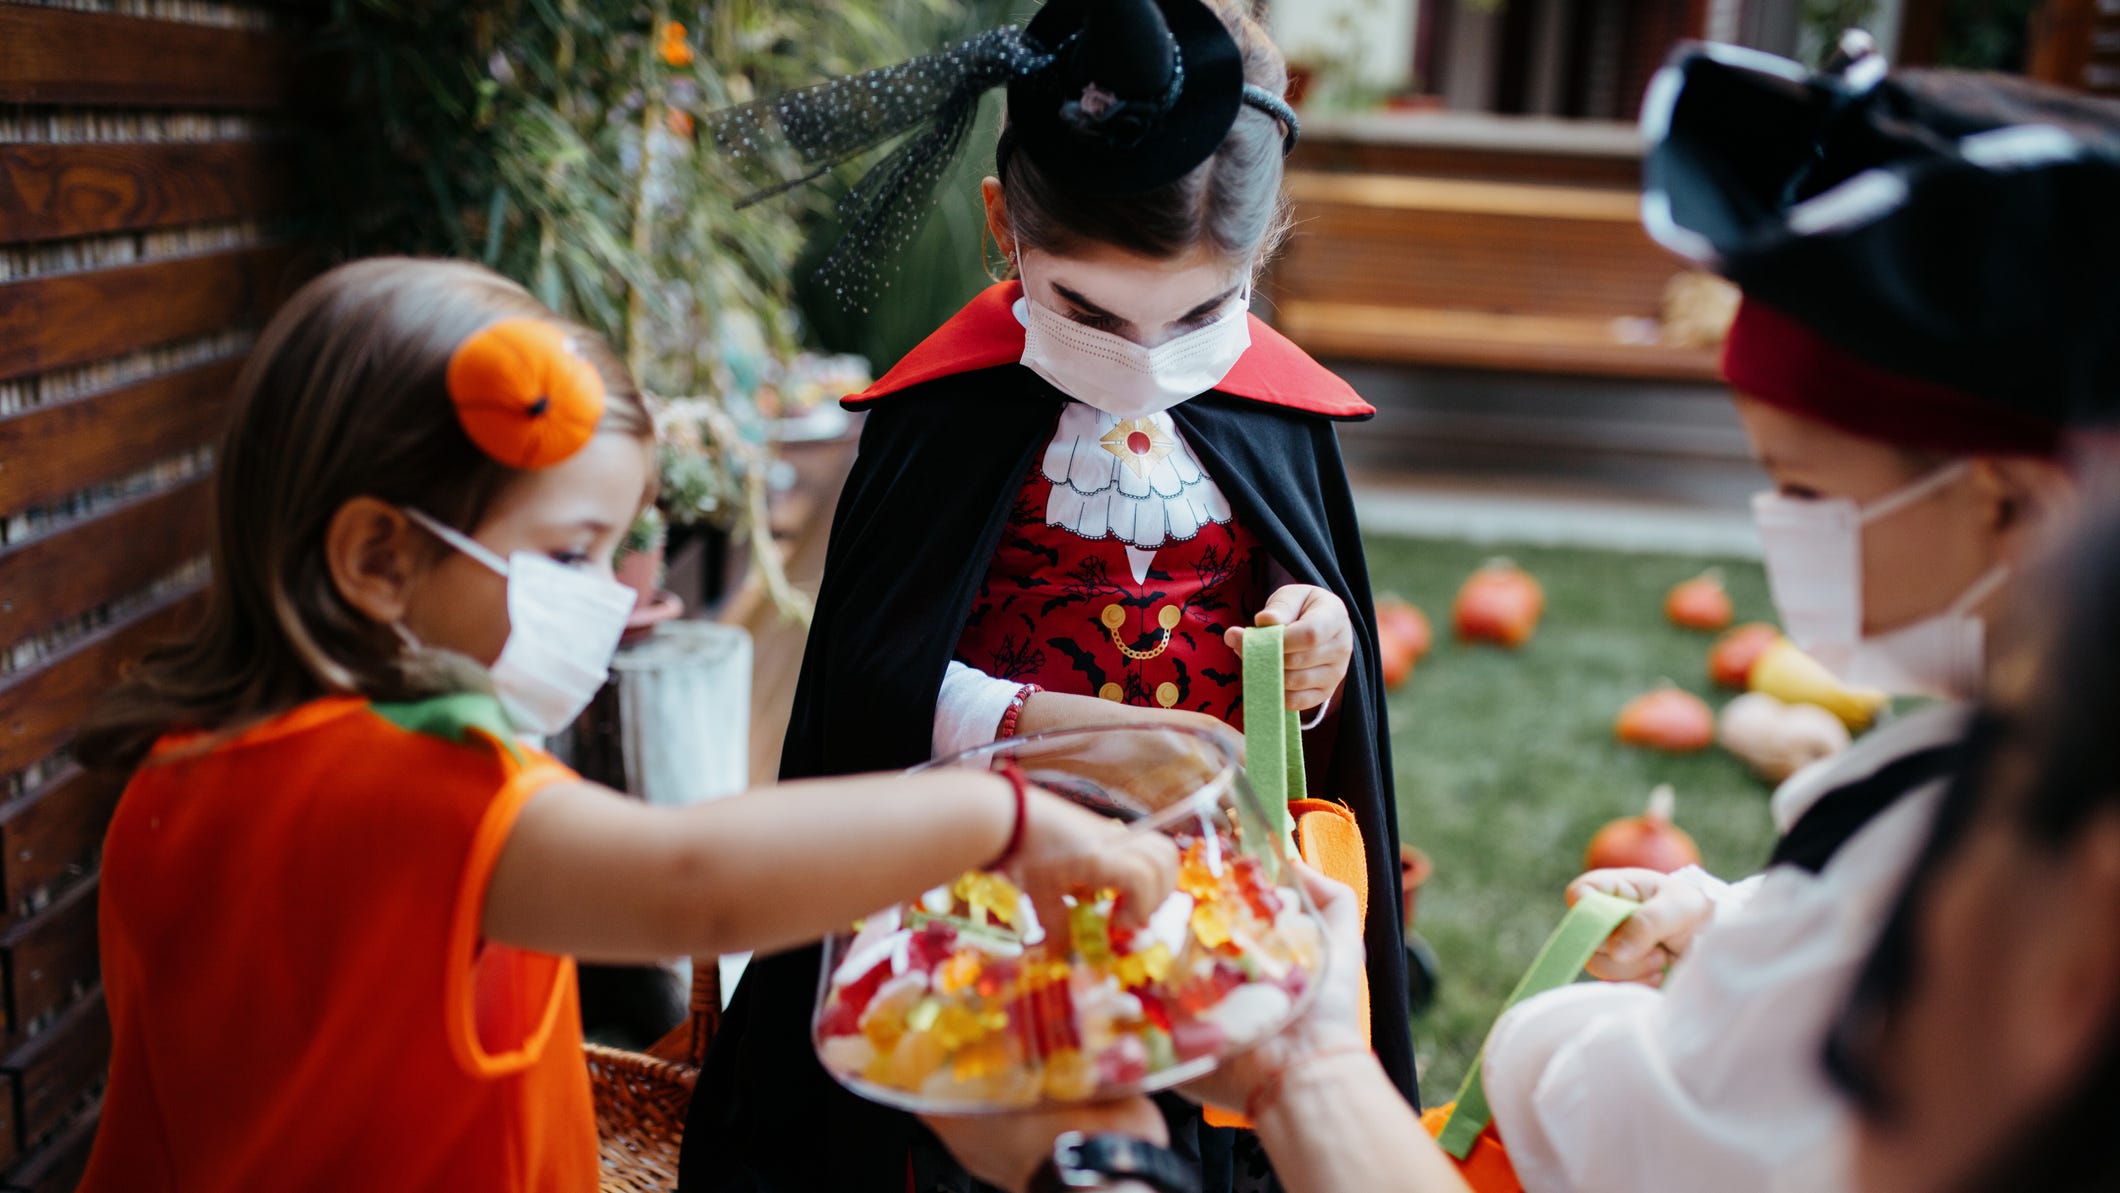 Trick or treat 2020 Is it safe for kids in NY? Here's what state says